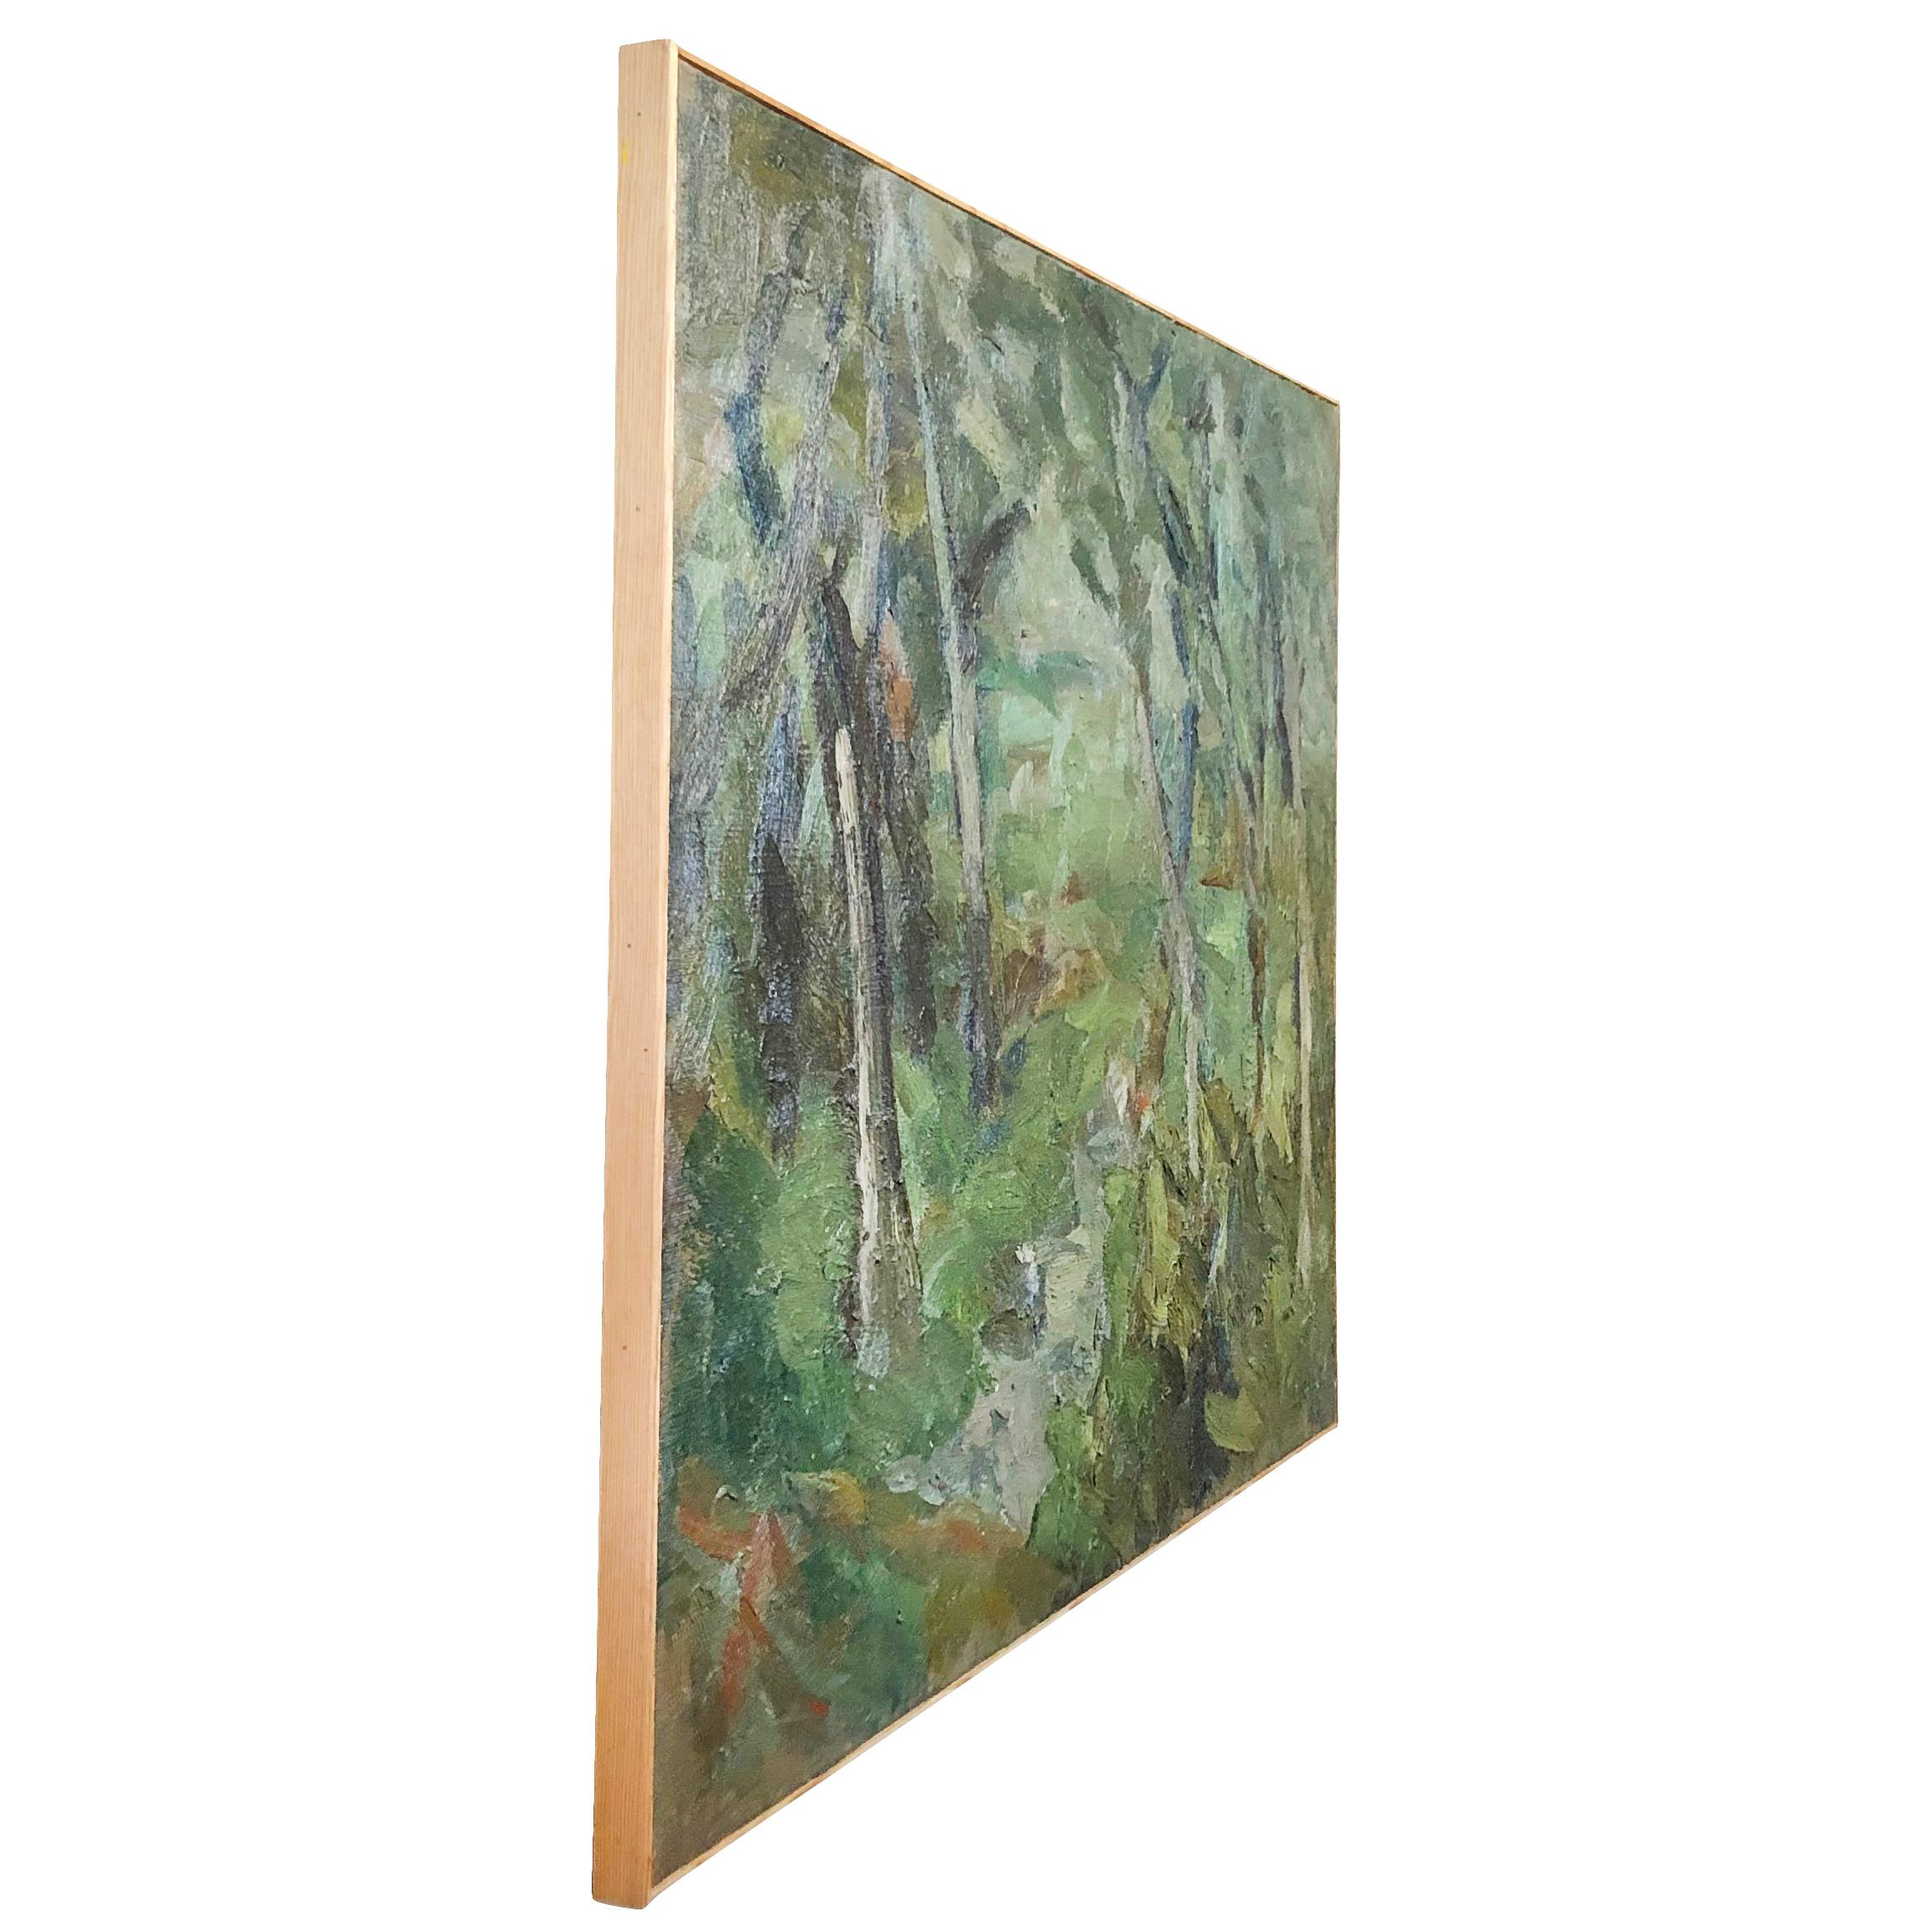 A forest landscape painting in green, oil on wood by Daniel Clesse, painted in France, signed and dated in 1962.

Daniel Clesse was a French painter born in 1932 Paris, France and passed away in 2016. He and his wife Christiane Clesse dedicated